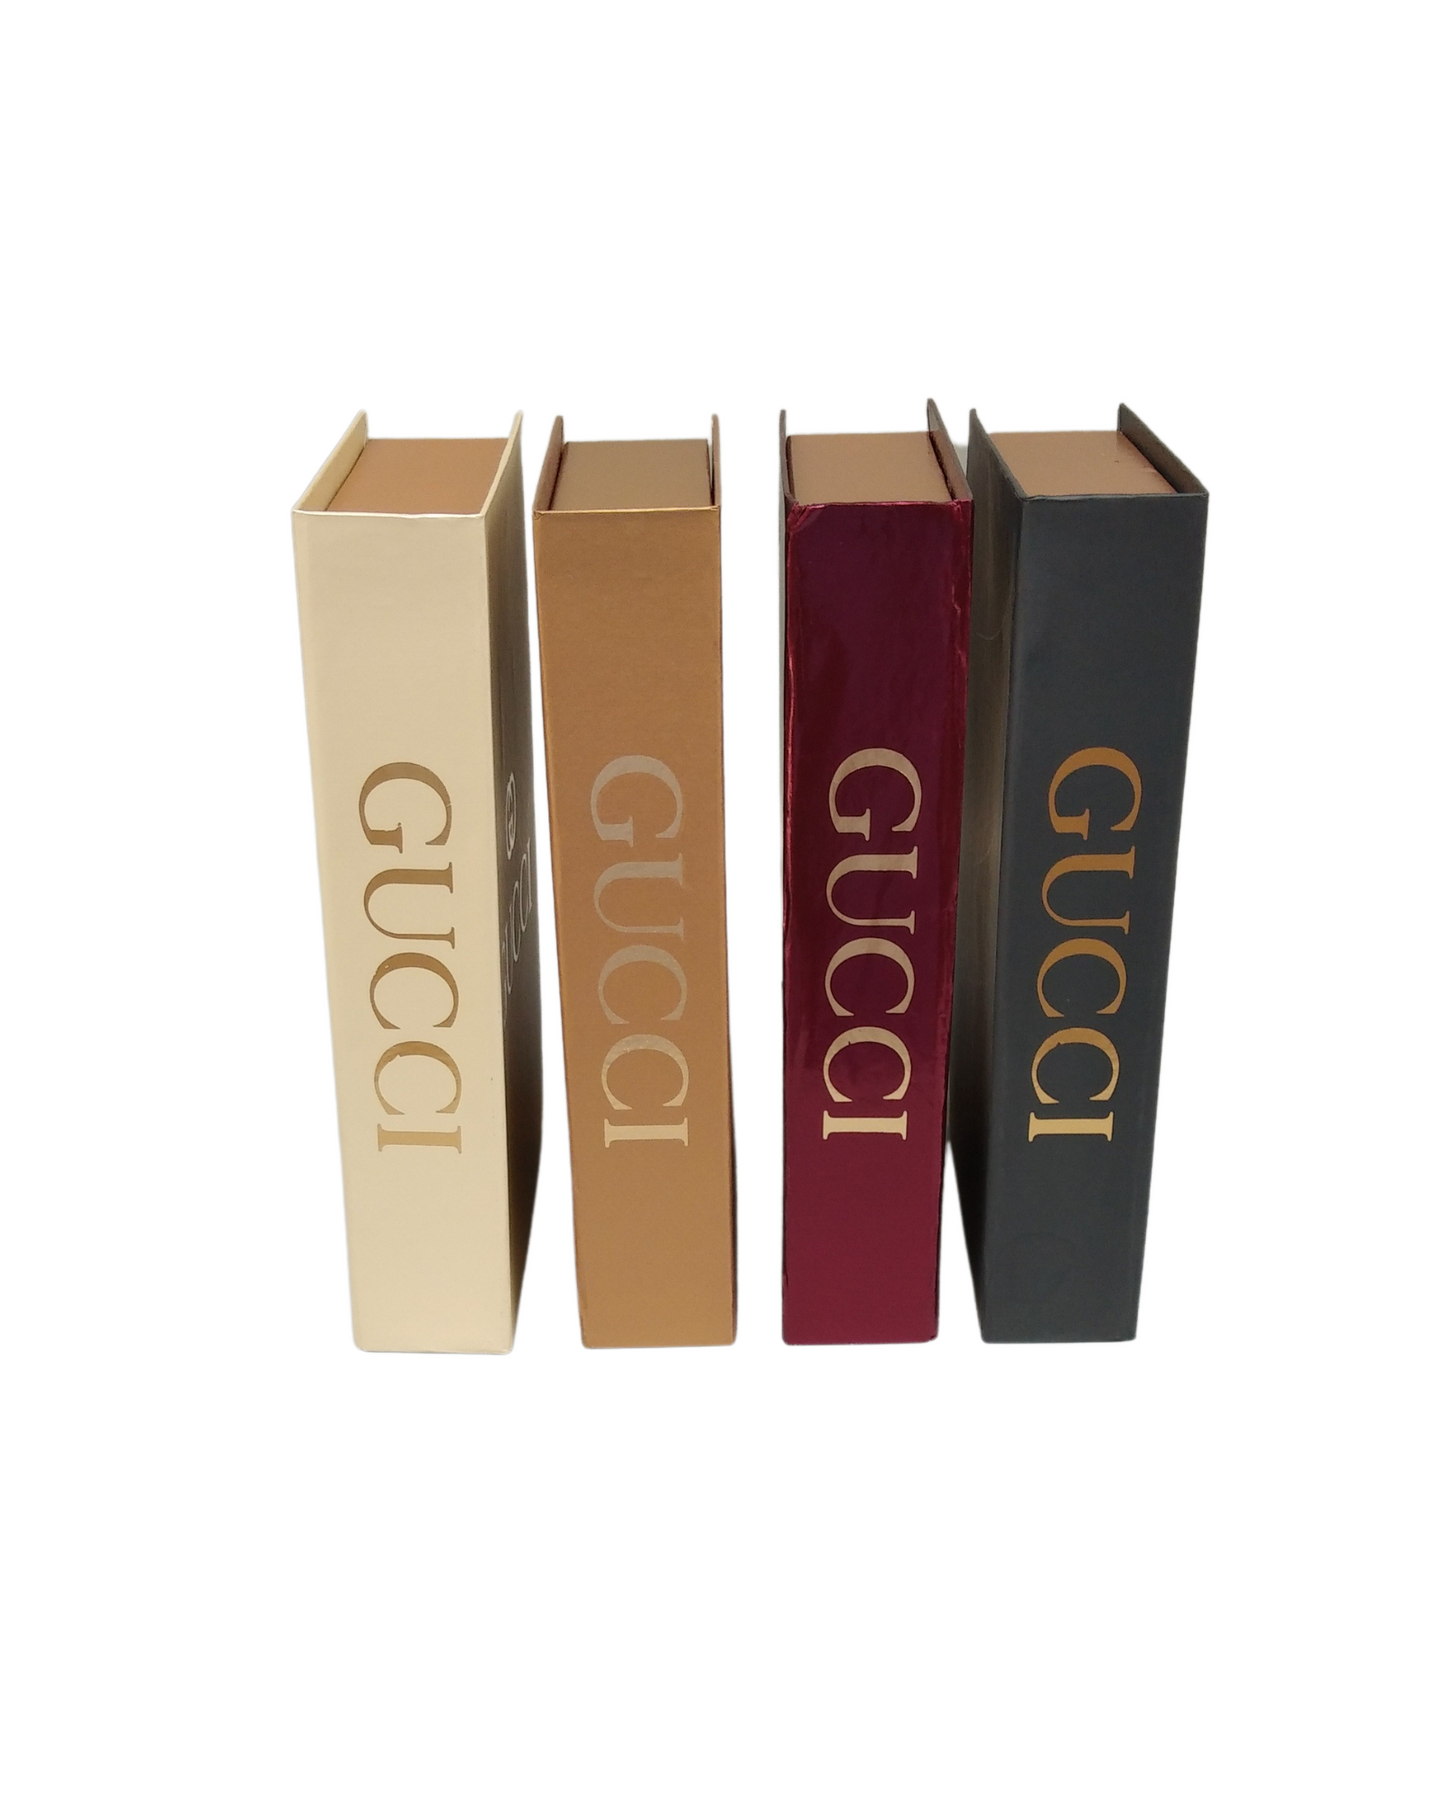 Decor Dummy Books Openable & Box - Available In 4 Colors